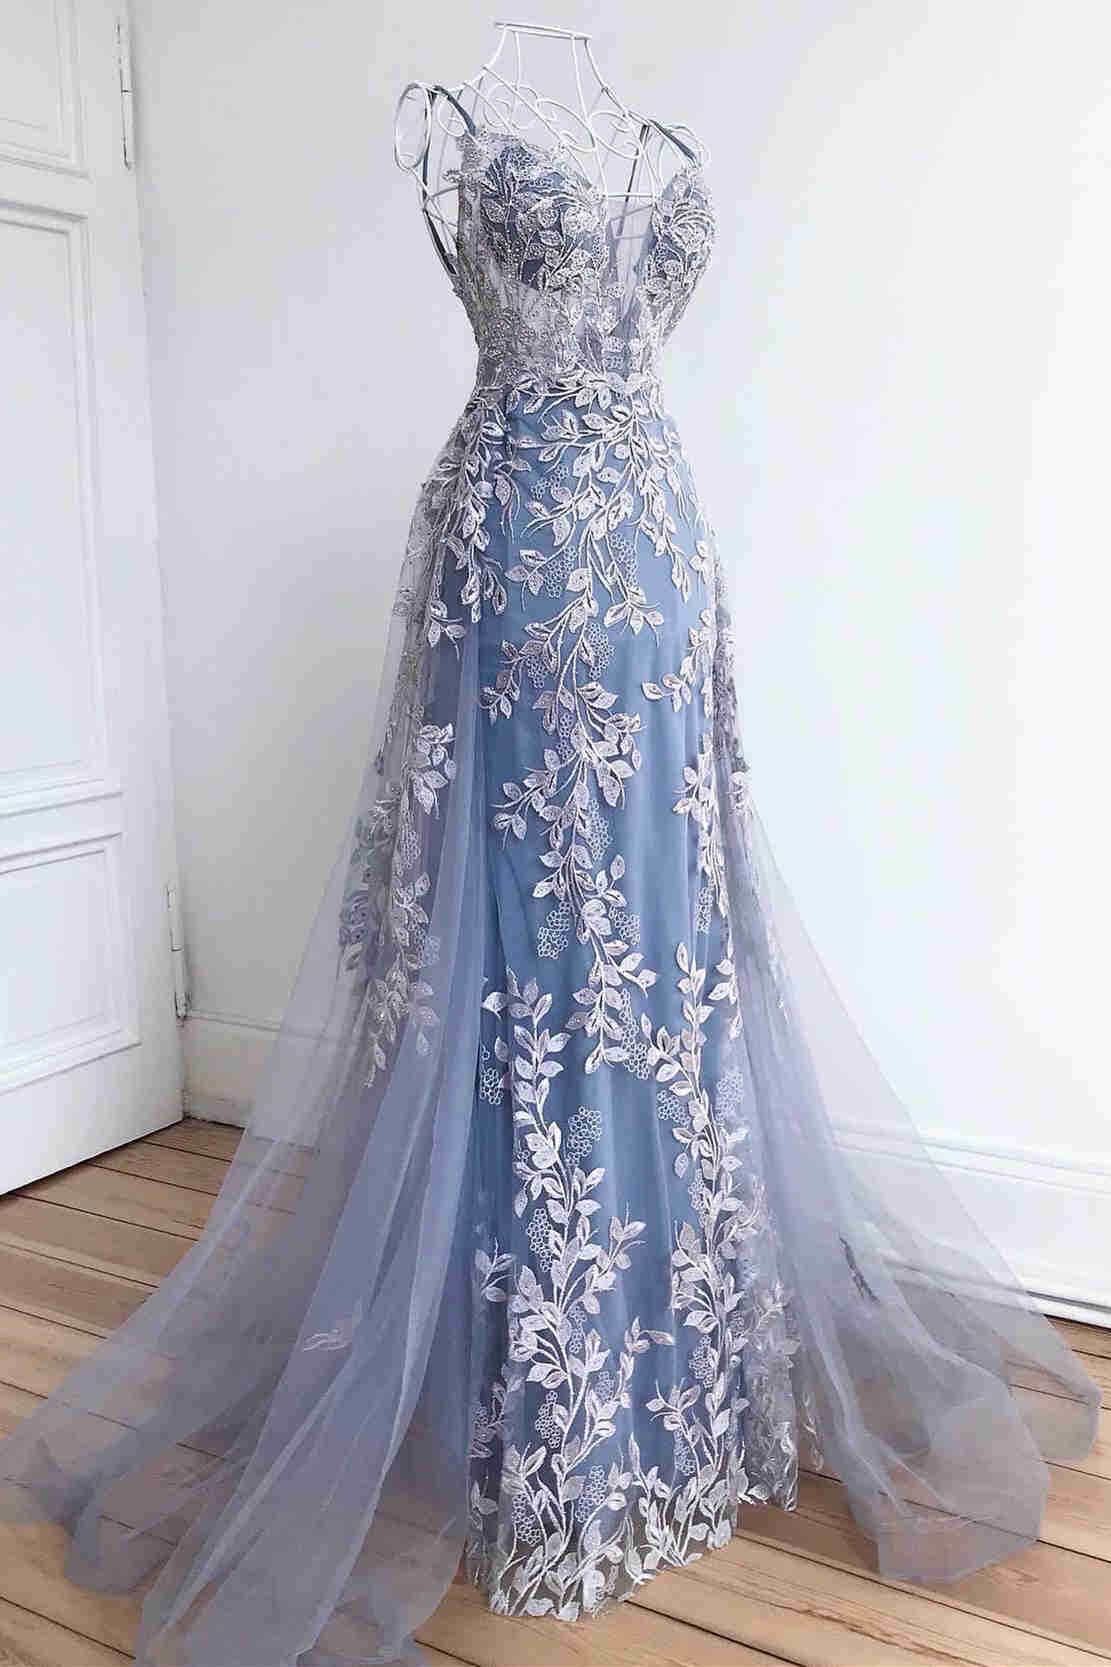 Tulle with Floral Ice Blue Lace Appliqued Prom Dress - VQ